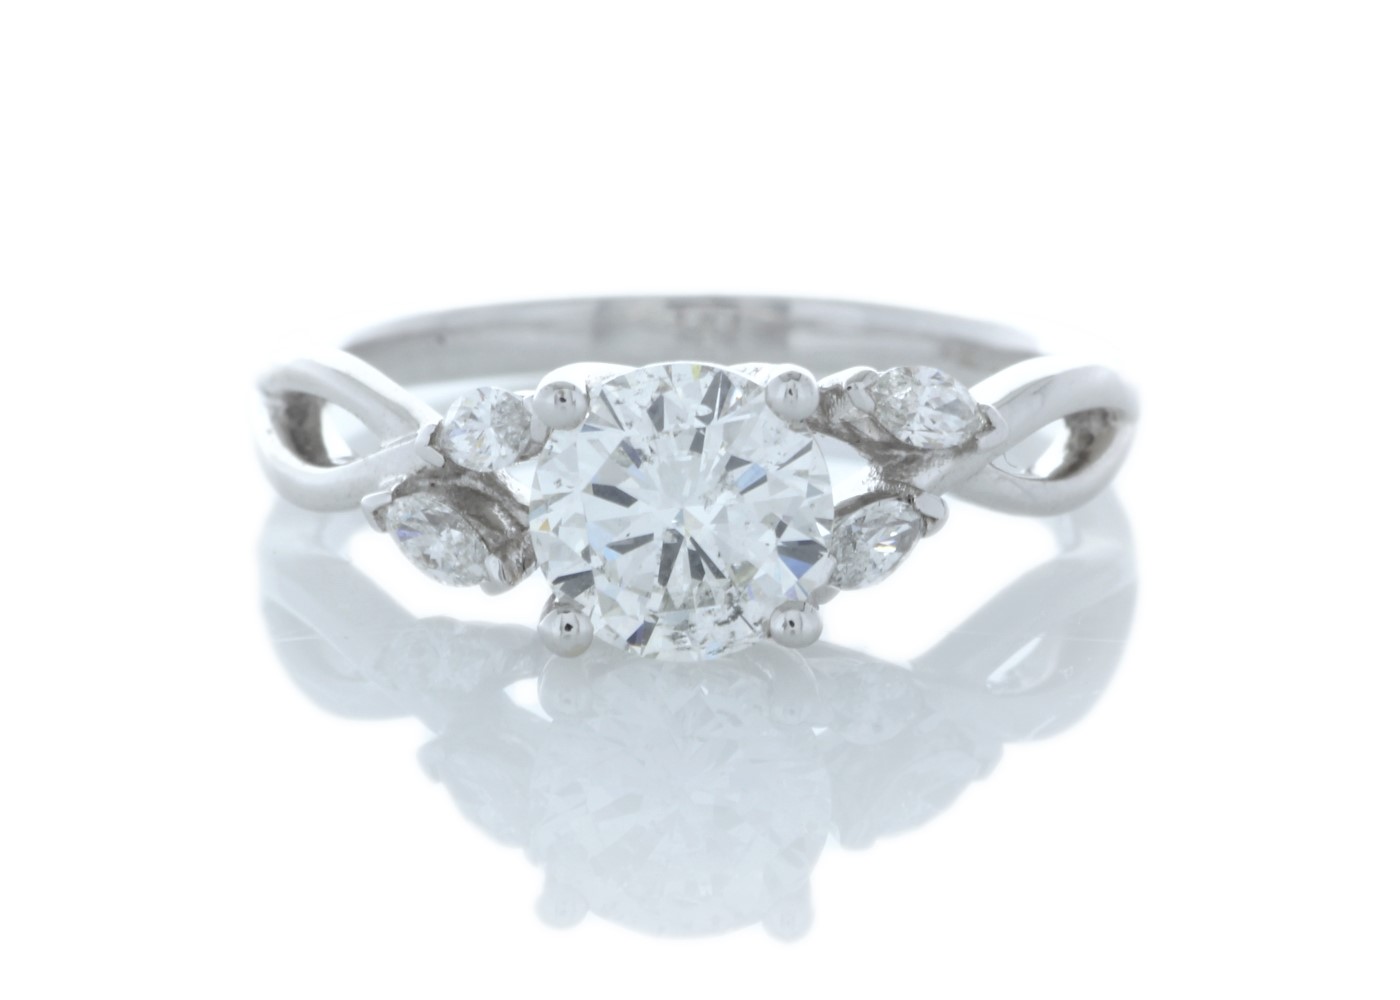 18ct White Gold Single Stone Diamond Ring With Marquise Set Shoulders (1.00) 1.16 Carats - Image 2 of 5